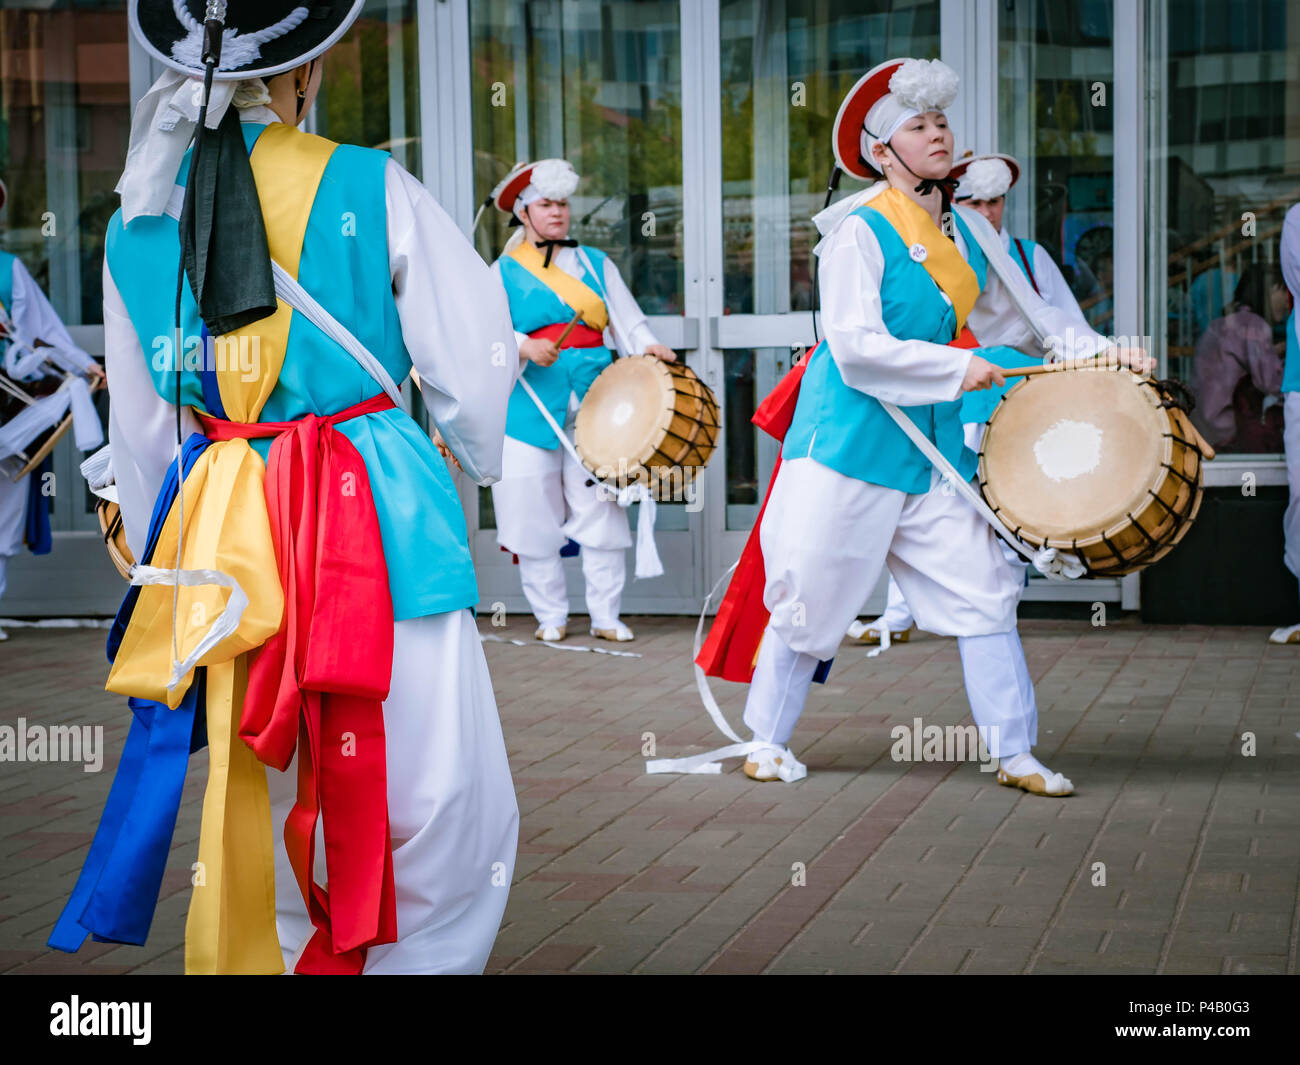 Moscow, Russia, July 12, 2018: Korean traditional musical instruments. A group of musicians and dancers in bright colored suits perform traditional Ko Stock Photo